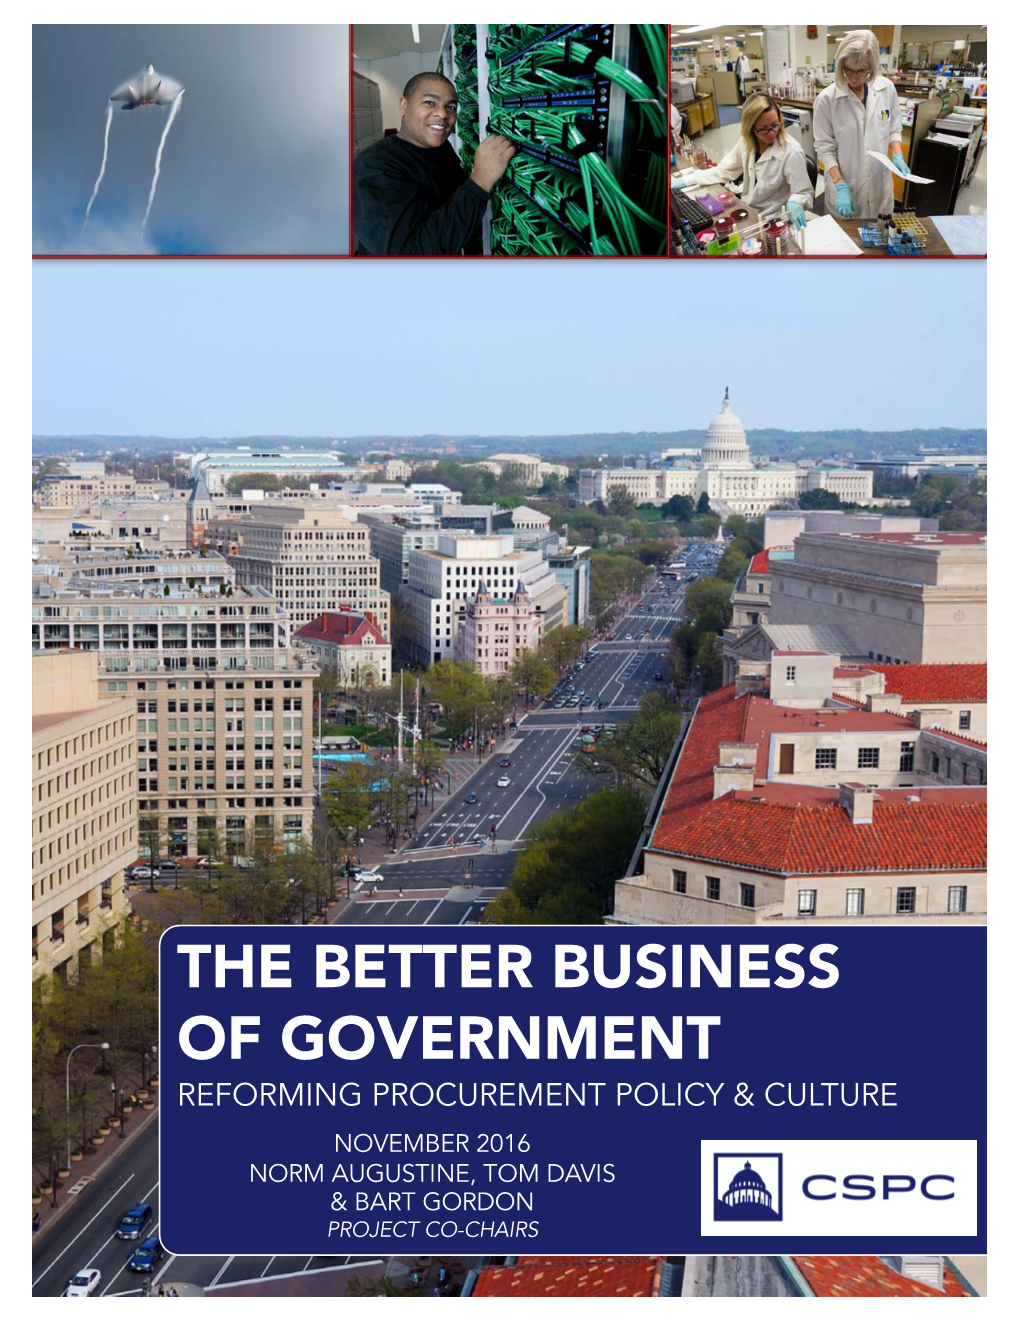 The Better Business of Government Reforming Procurement Policy & Culture November 2016 Norm Augustine, Tom Davis & Bart Gordon Project Co-Chairs